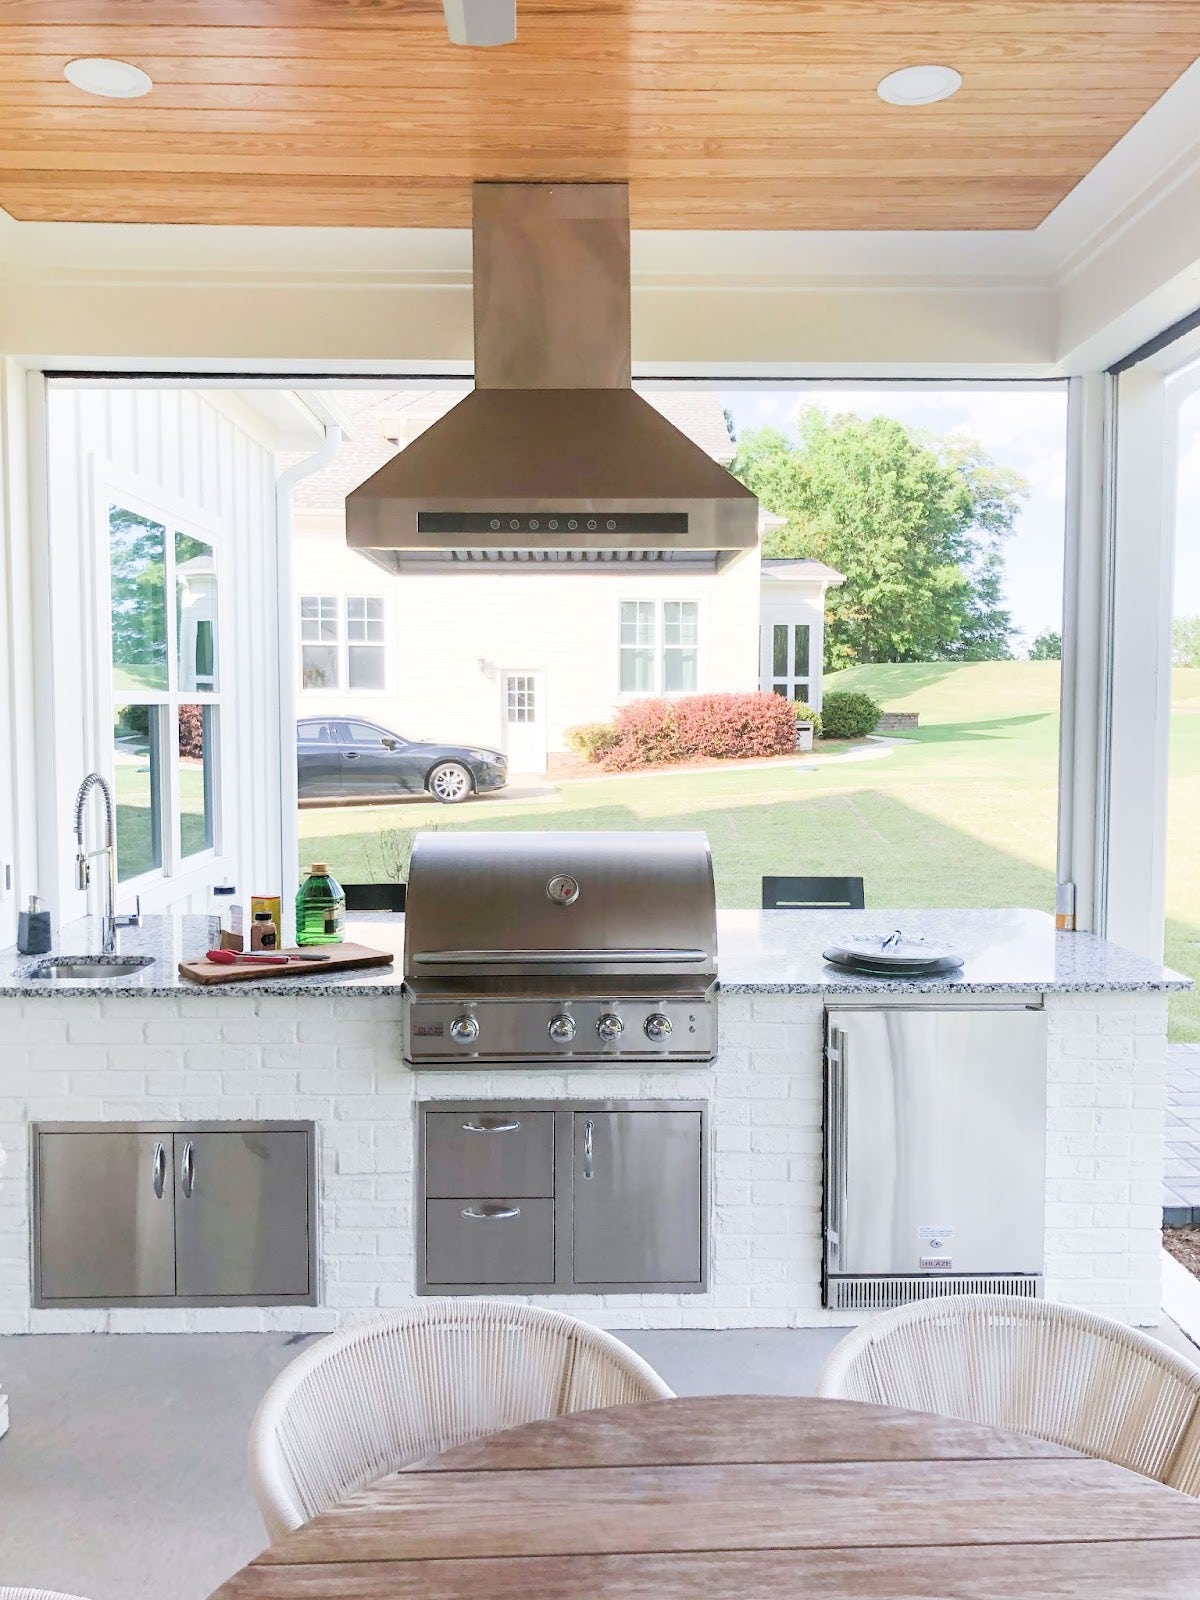 Sunlit patio kitchen with sleek appliances, including a grill and refrigerator, integrated into a clean white brick setting with a green lawn in the background.